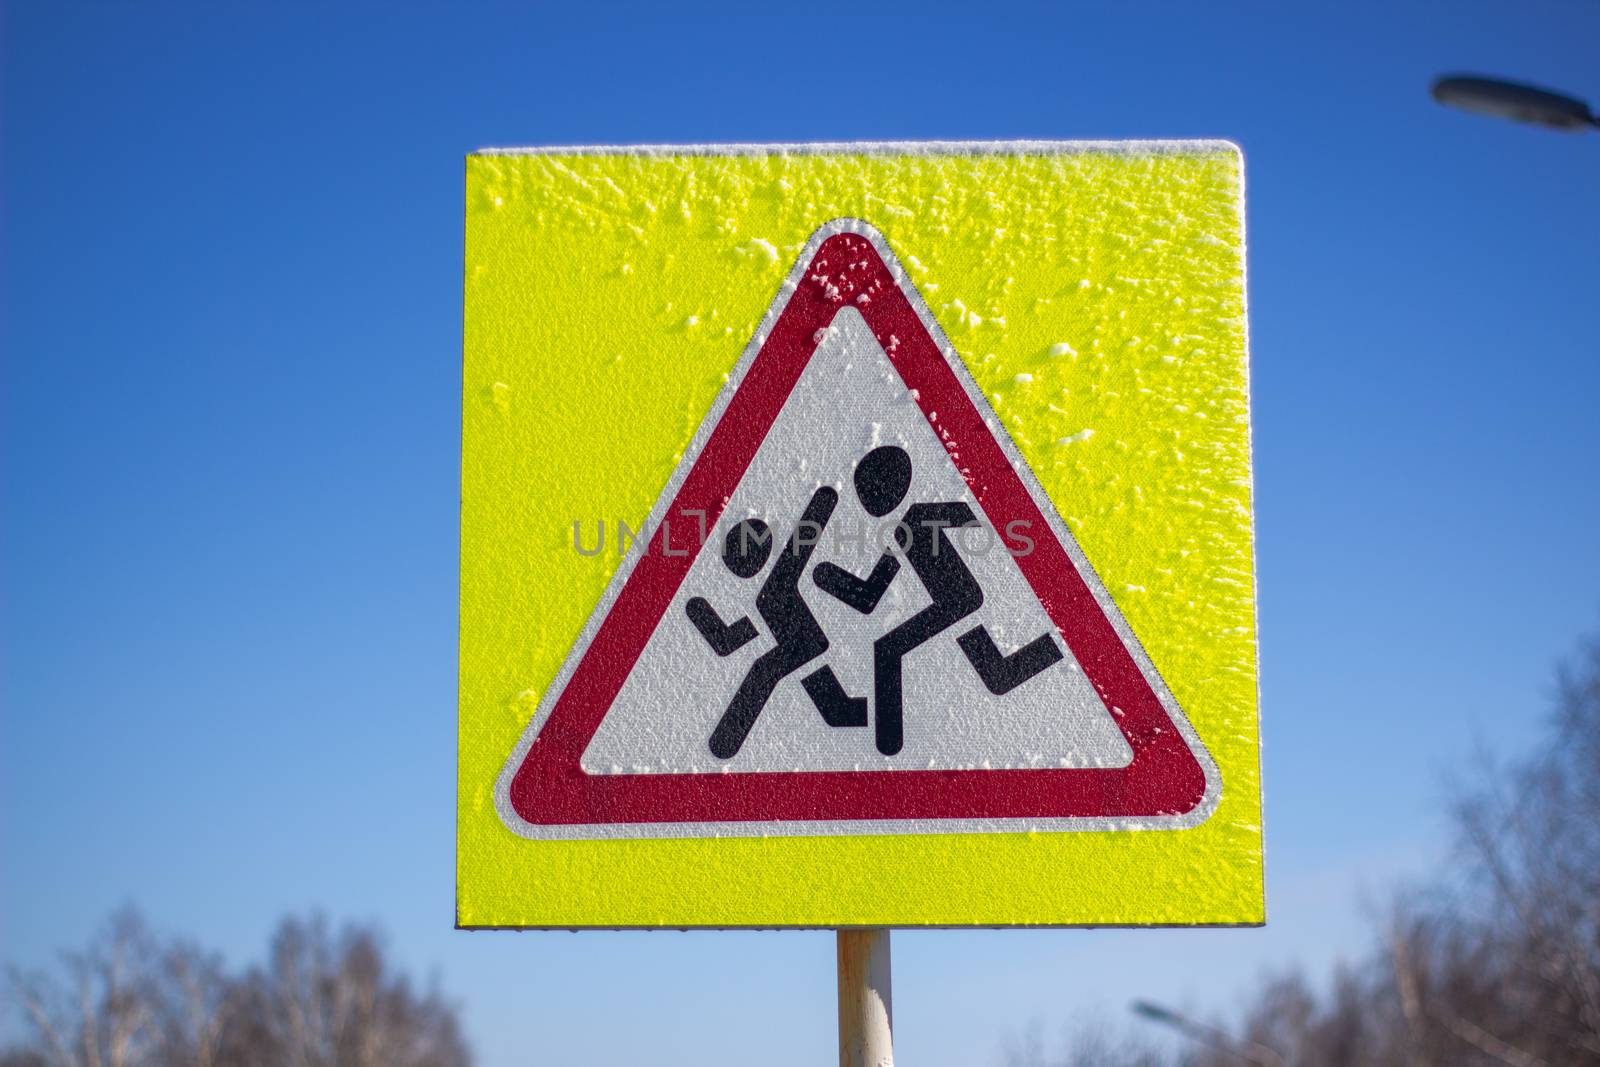 Pedestrian crossing sign on a yellow background. On a Sunny winter day